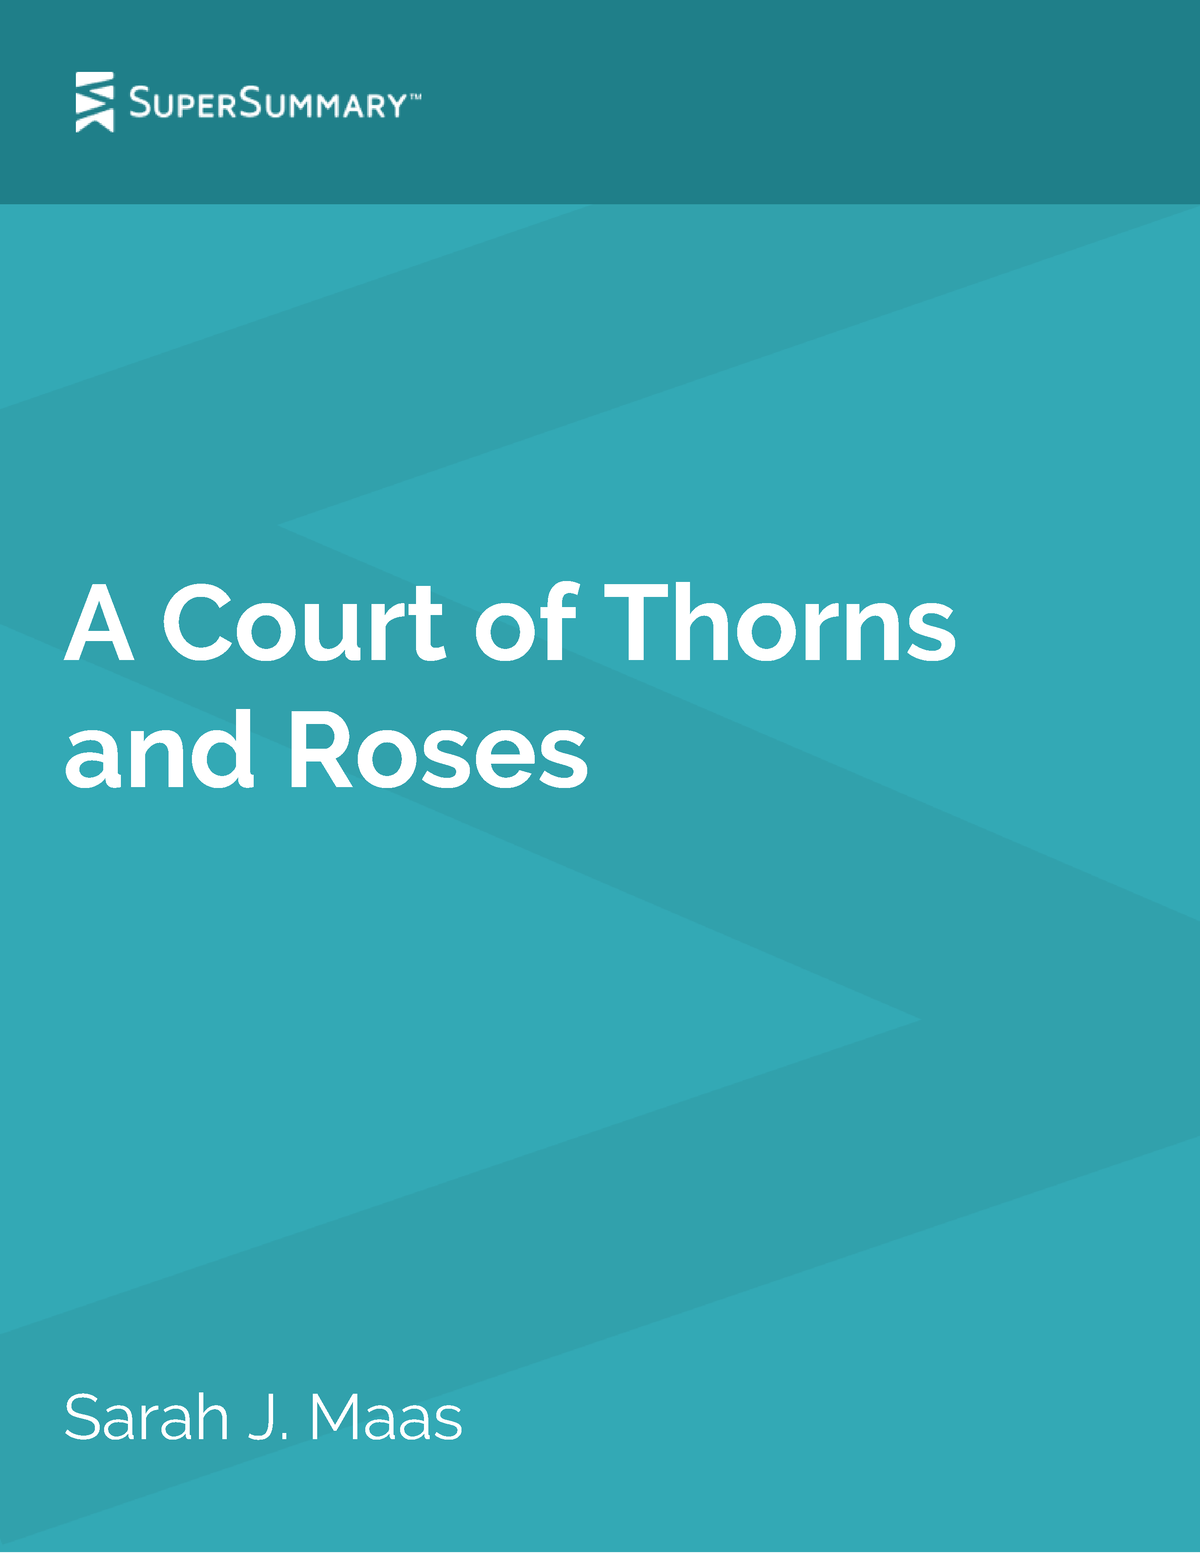 A Court of Thorns and Roses A Court of Thorns and Roses Sarah J Maas